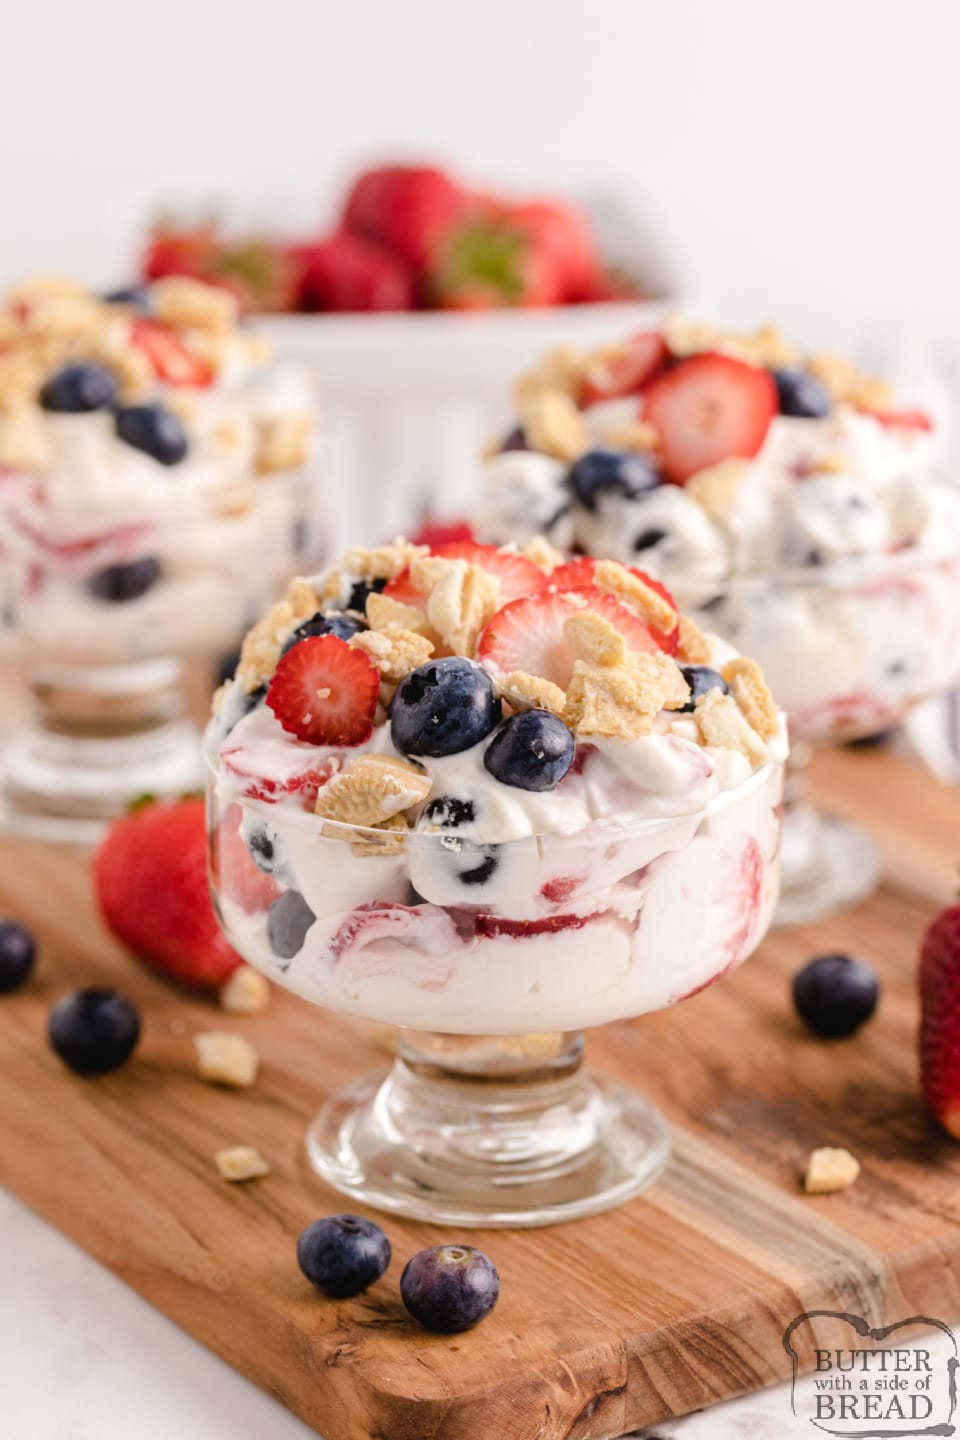 Lemon Berry Yogurt Parfaits made with sweetened whipped cream, yogurt and lots of fresh berries. Simple no-bake dessert or snack that is light and delicious!